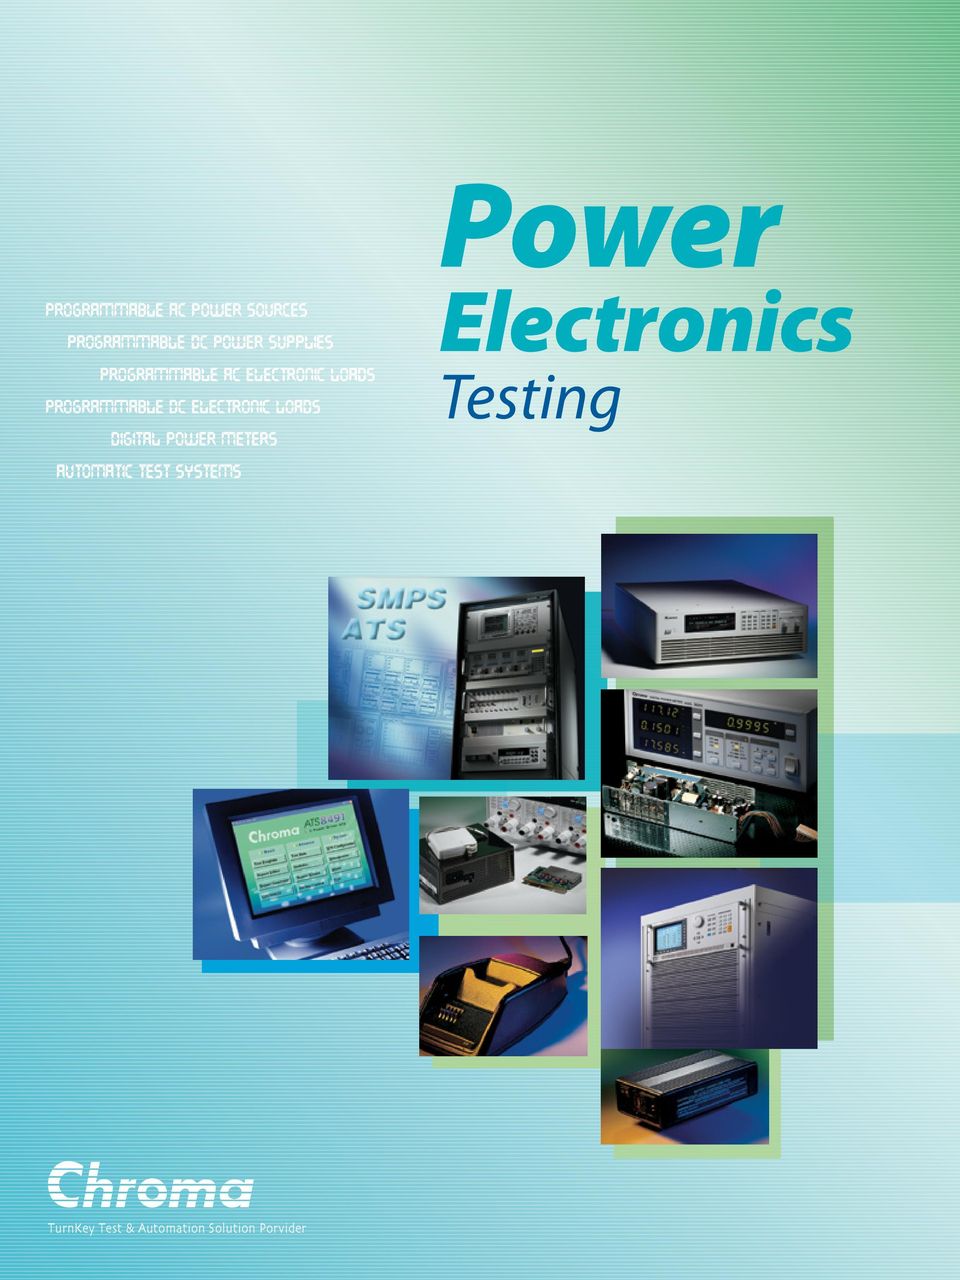 Electronic Loads Digital Power Meters Automatic Test